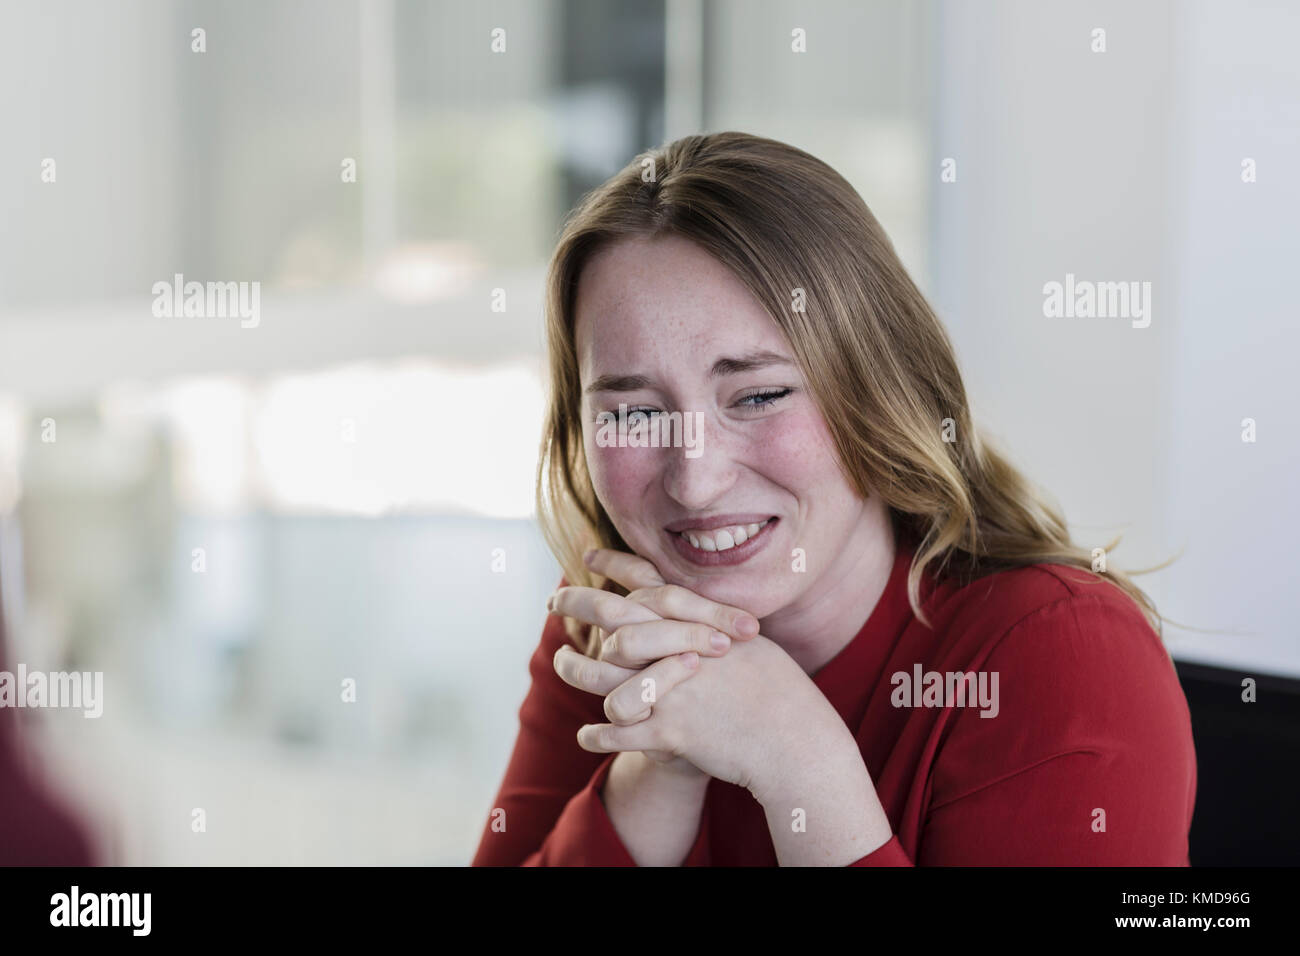 Businesswoman laughing with hands clasped Stock Photo